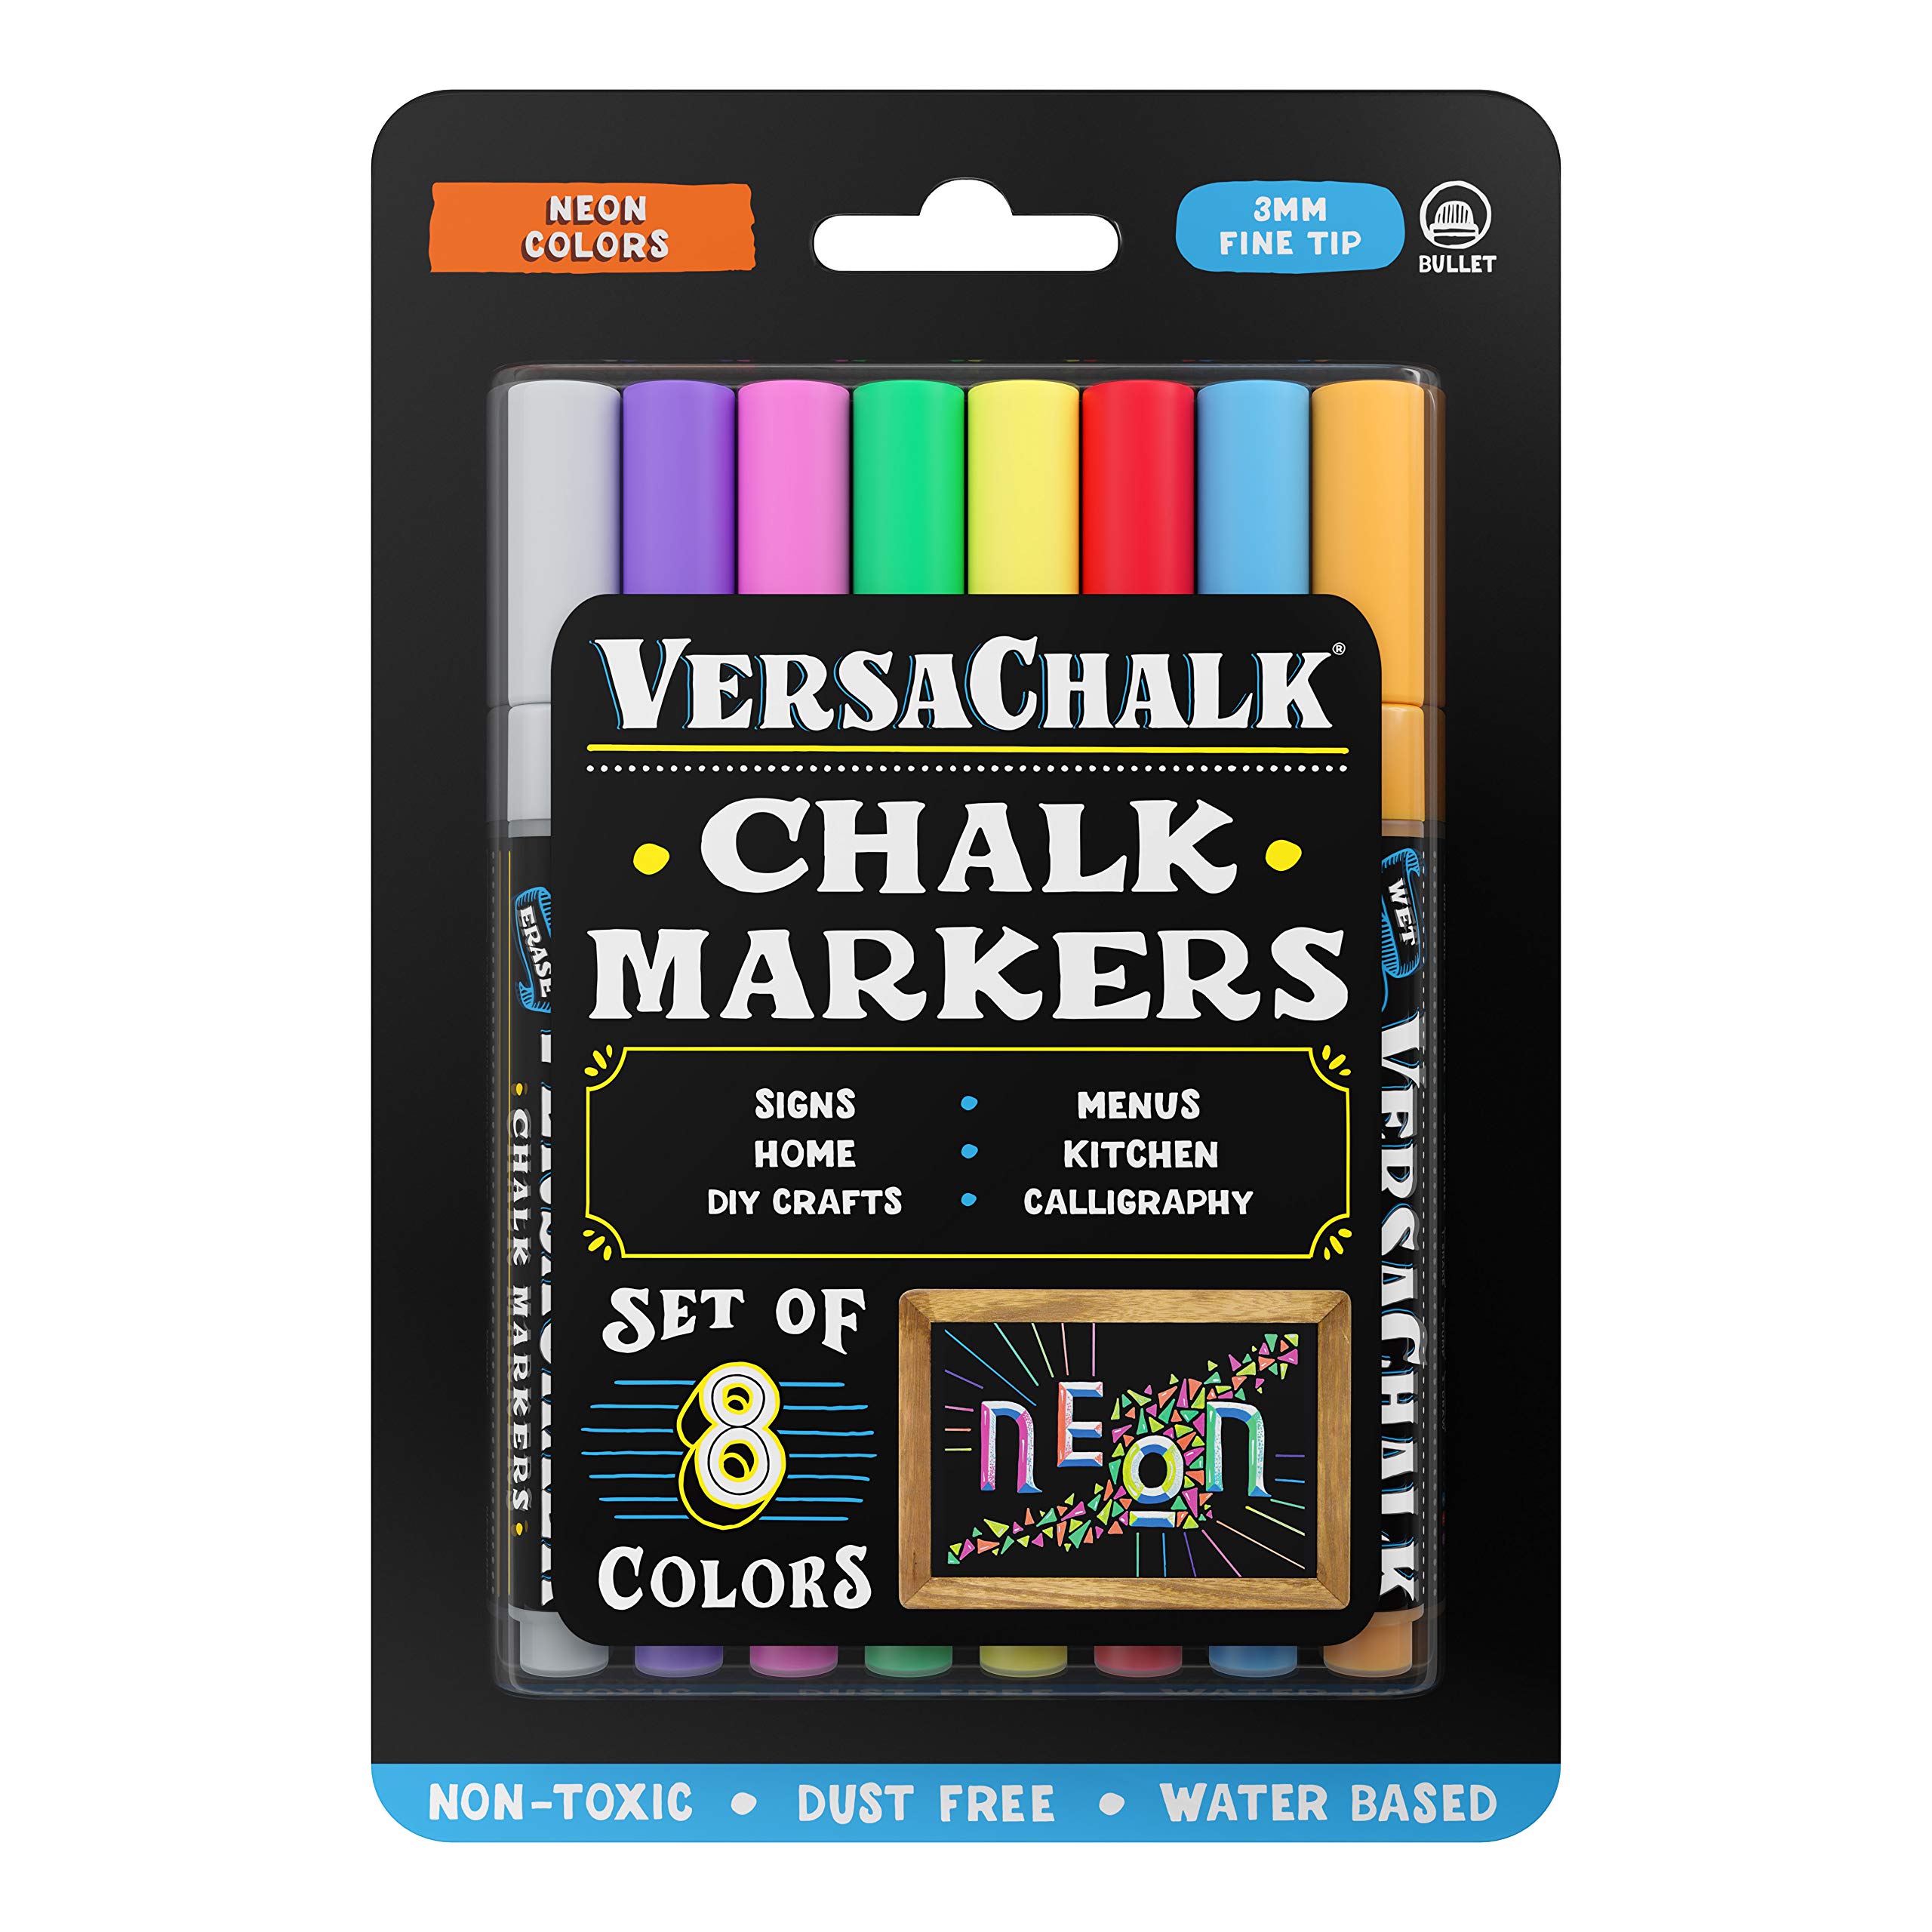 Book Cover VersaChalk Neon Liquid Chalk Markers for Blackboards (8 Pack, 3mm, Fine Tip) - Erasable Washable Chalk Pens for Chalkboard Signs, Windows, Glass, Events, Schools, Office Supplies, and Business Fine 3mm Neon Colors